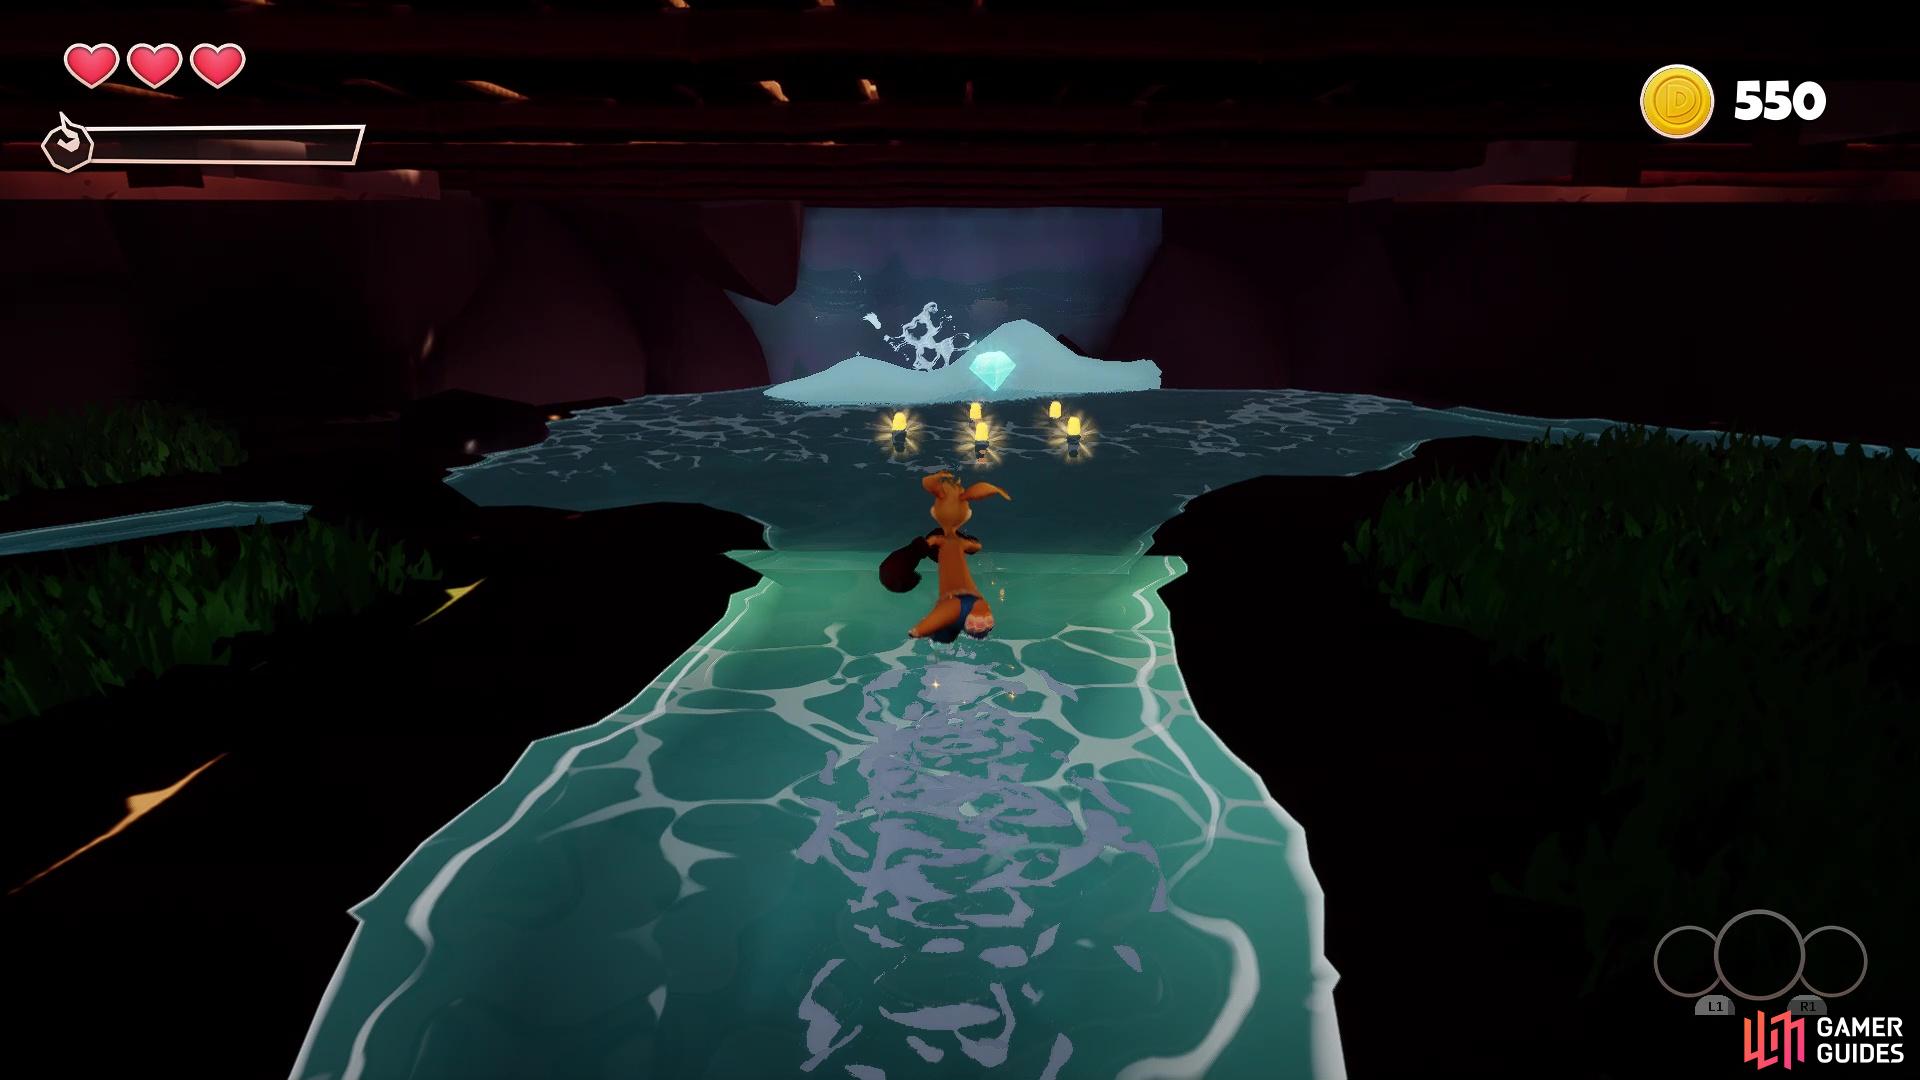 Go underneath the starting deck to find the second Crystal